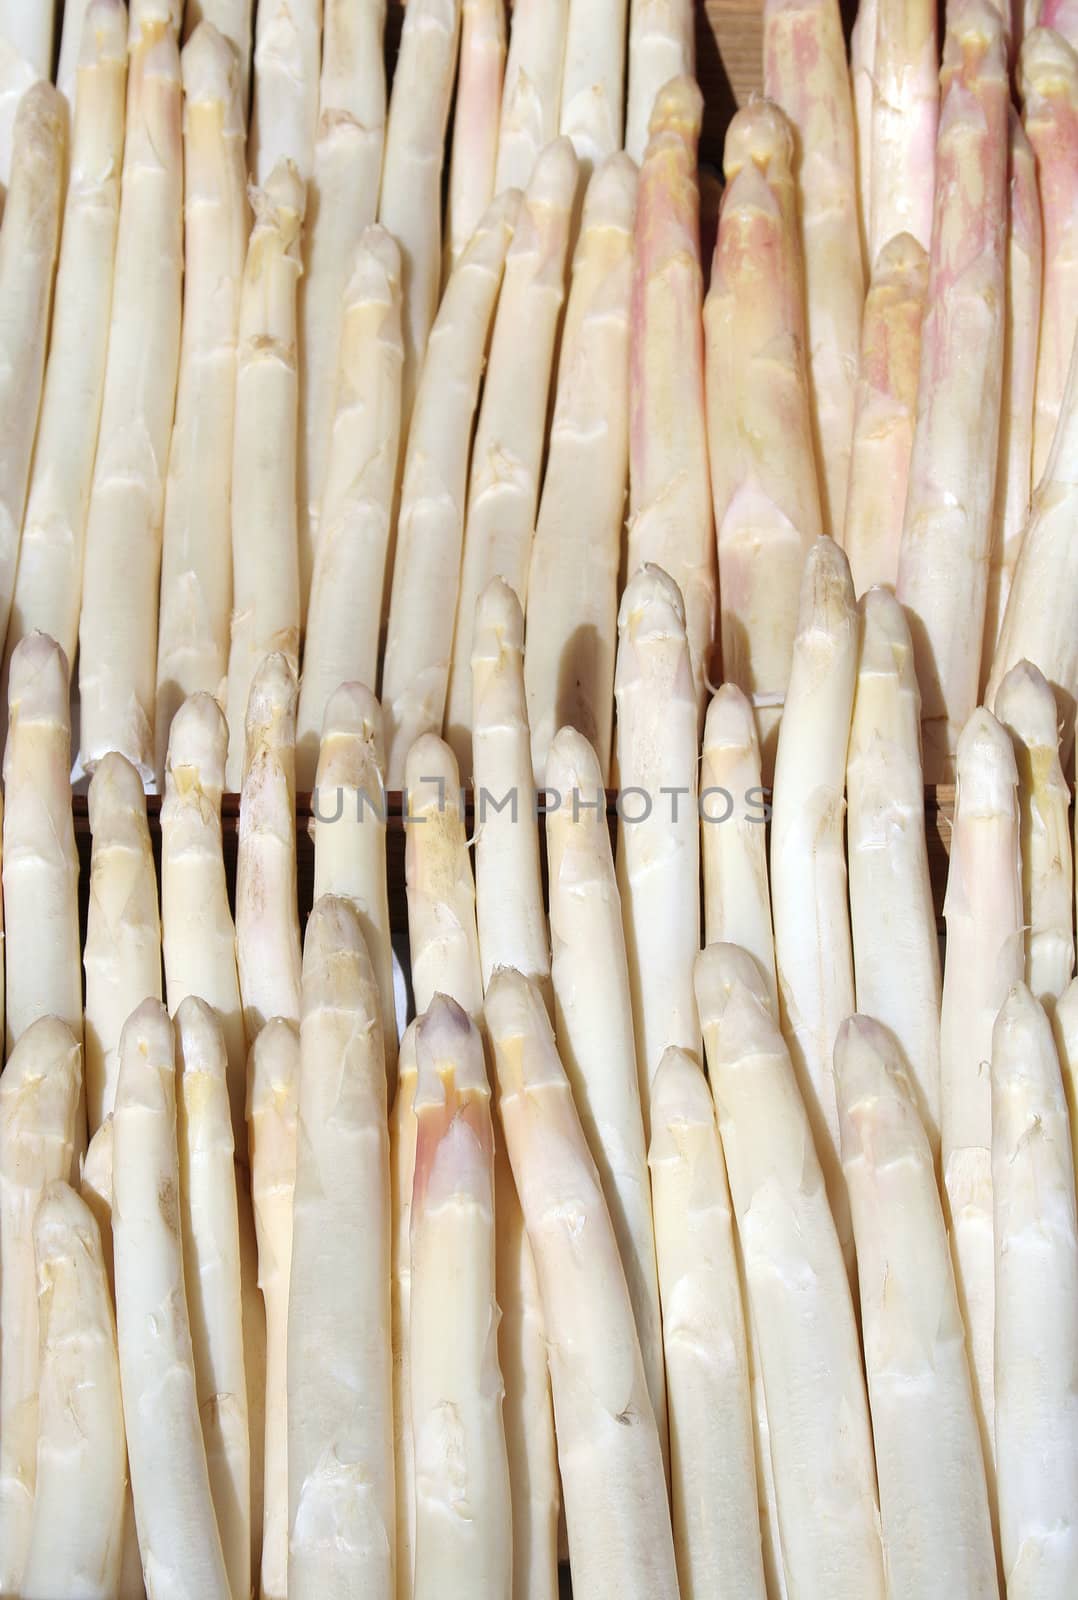 White asparagus displayed at the sunny outside of a grocery store.